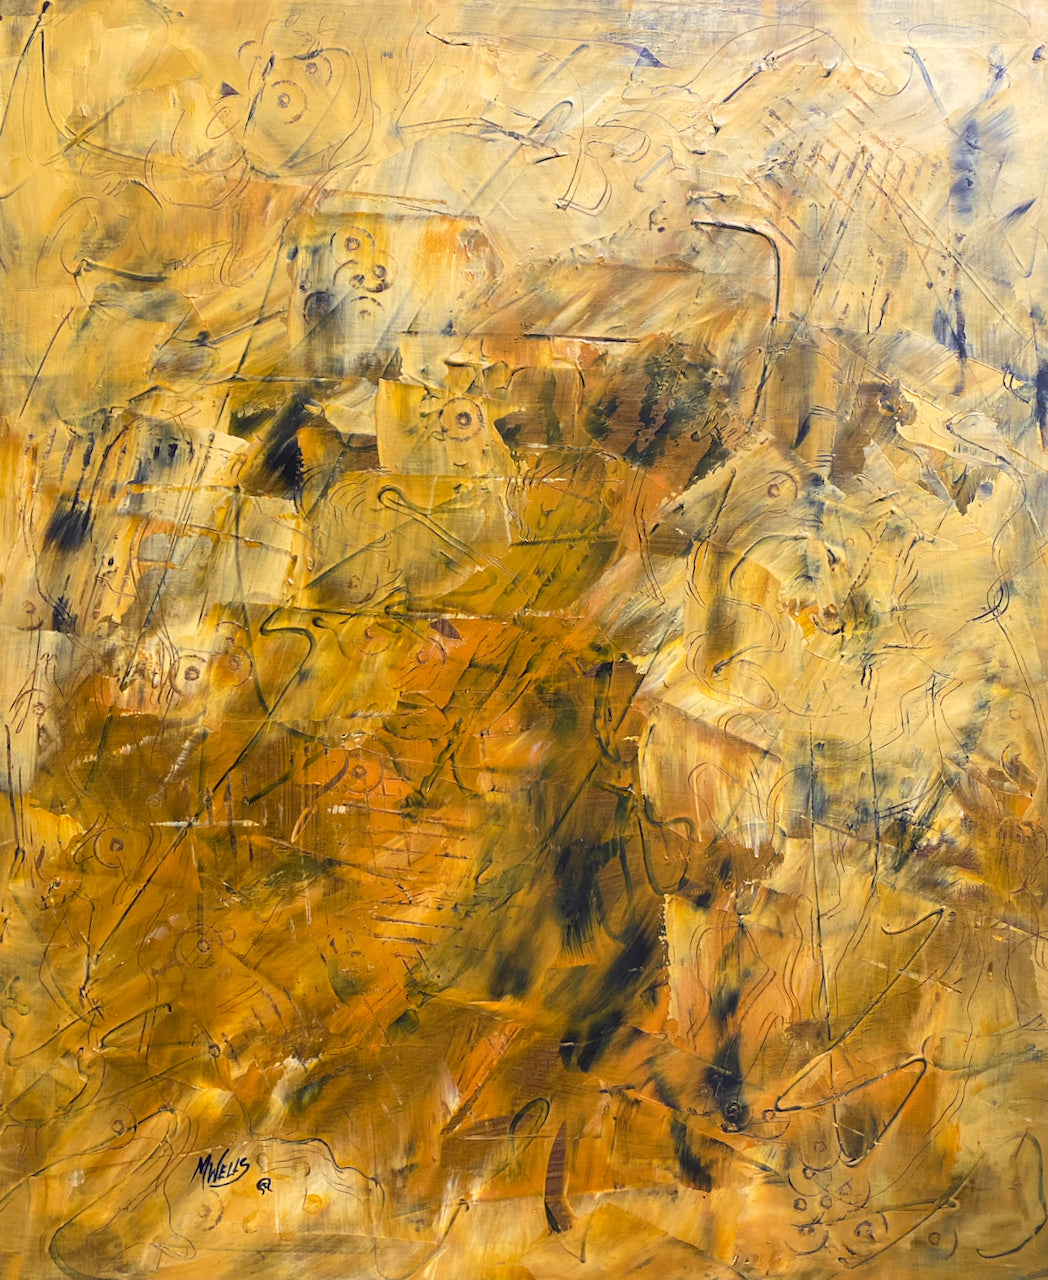 "Strength - Origins of Woman 1" by Marilyn Wells in oil and cold wax, 20" x 24" in yellows and dark tones with texture.